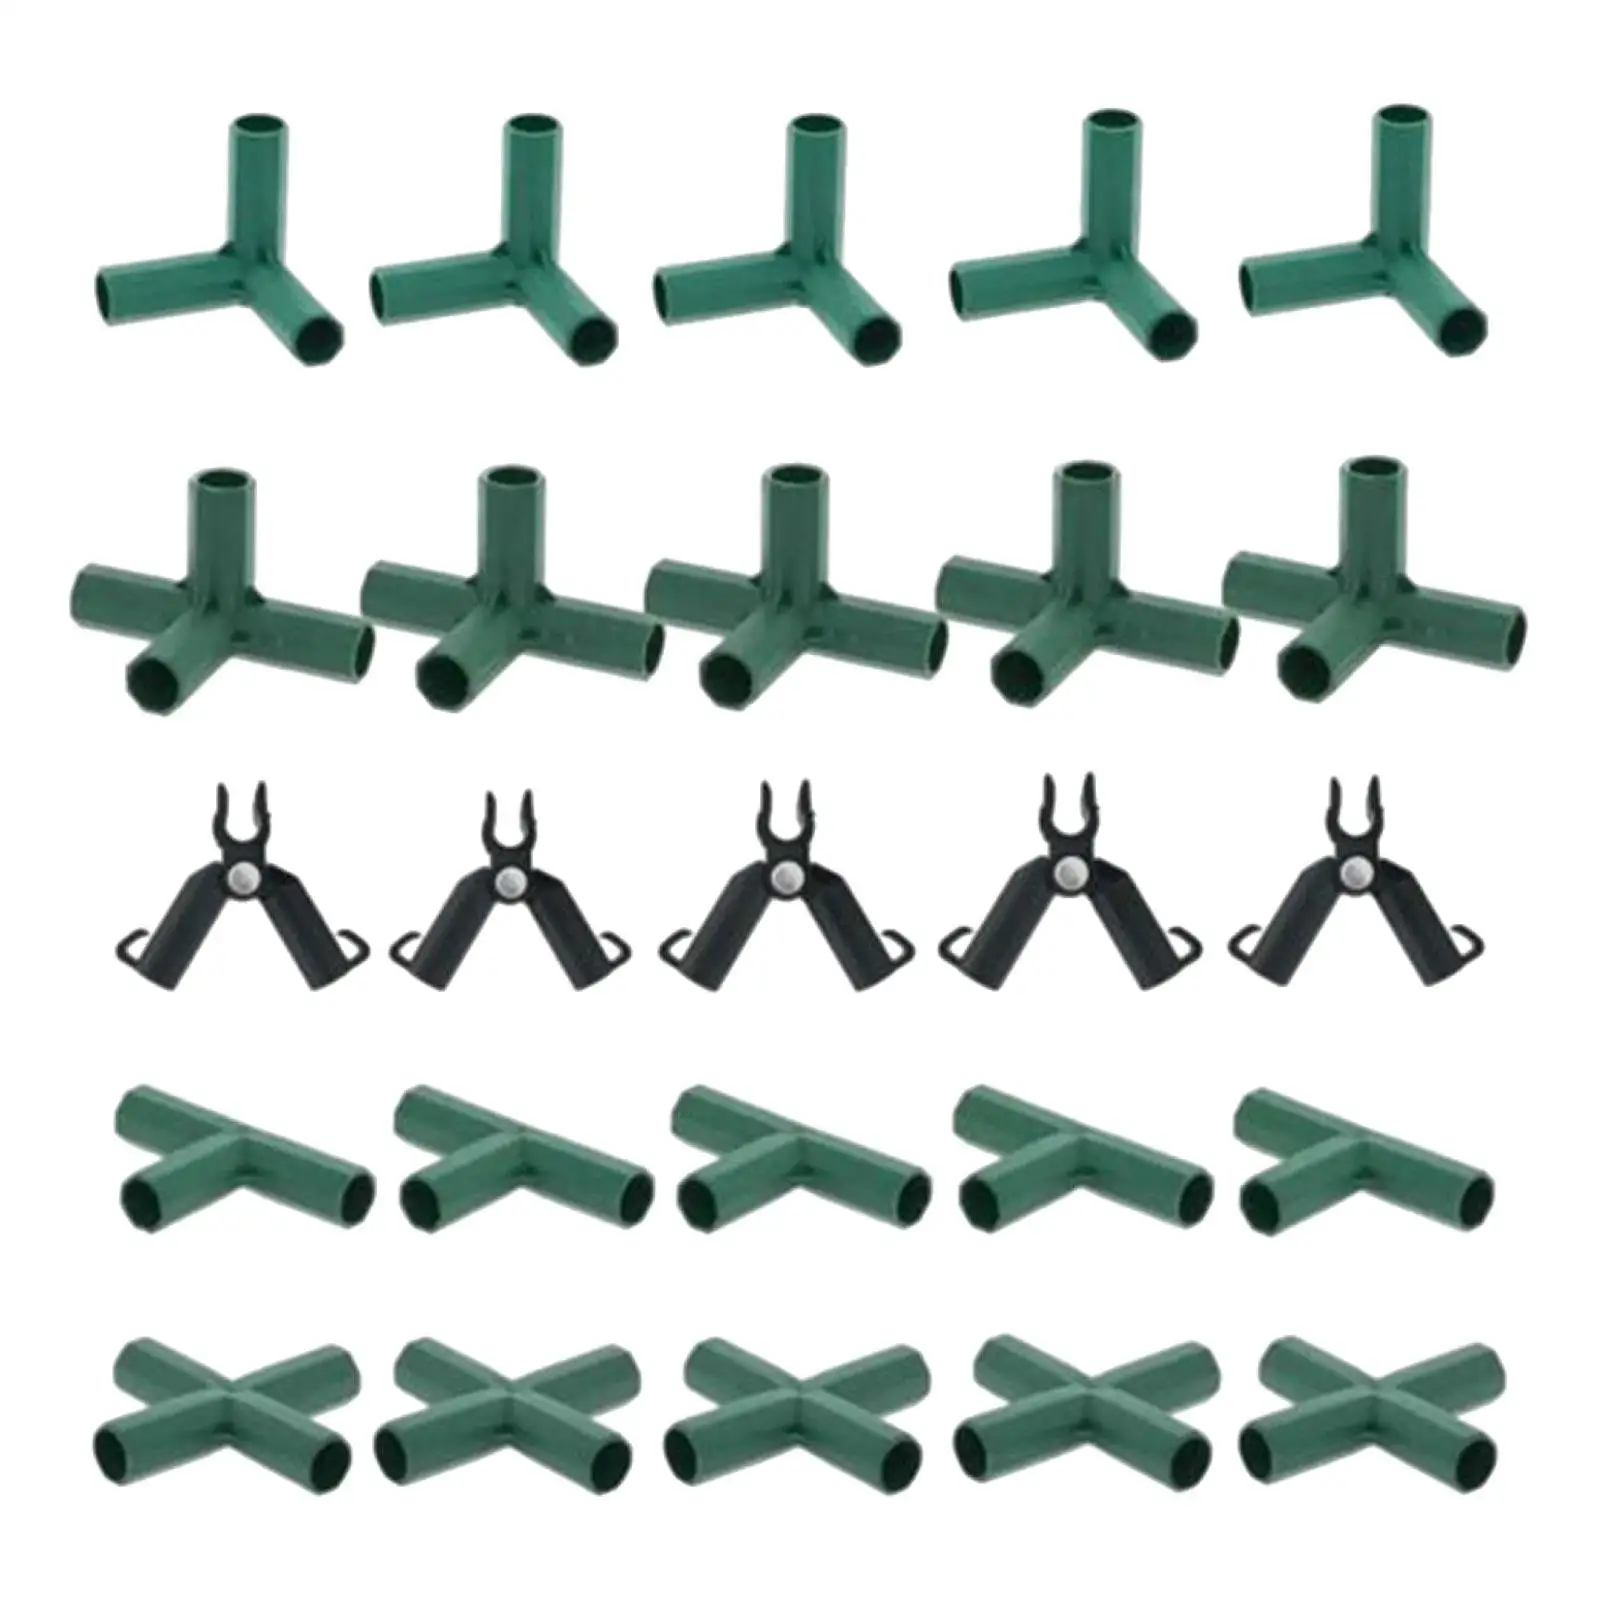 20Pcs Heavy Duty Greenhouse Frame Connector 5 Types Gardening Frame Joints Pole Connector for Gardening Grape Trellis